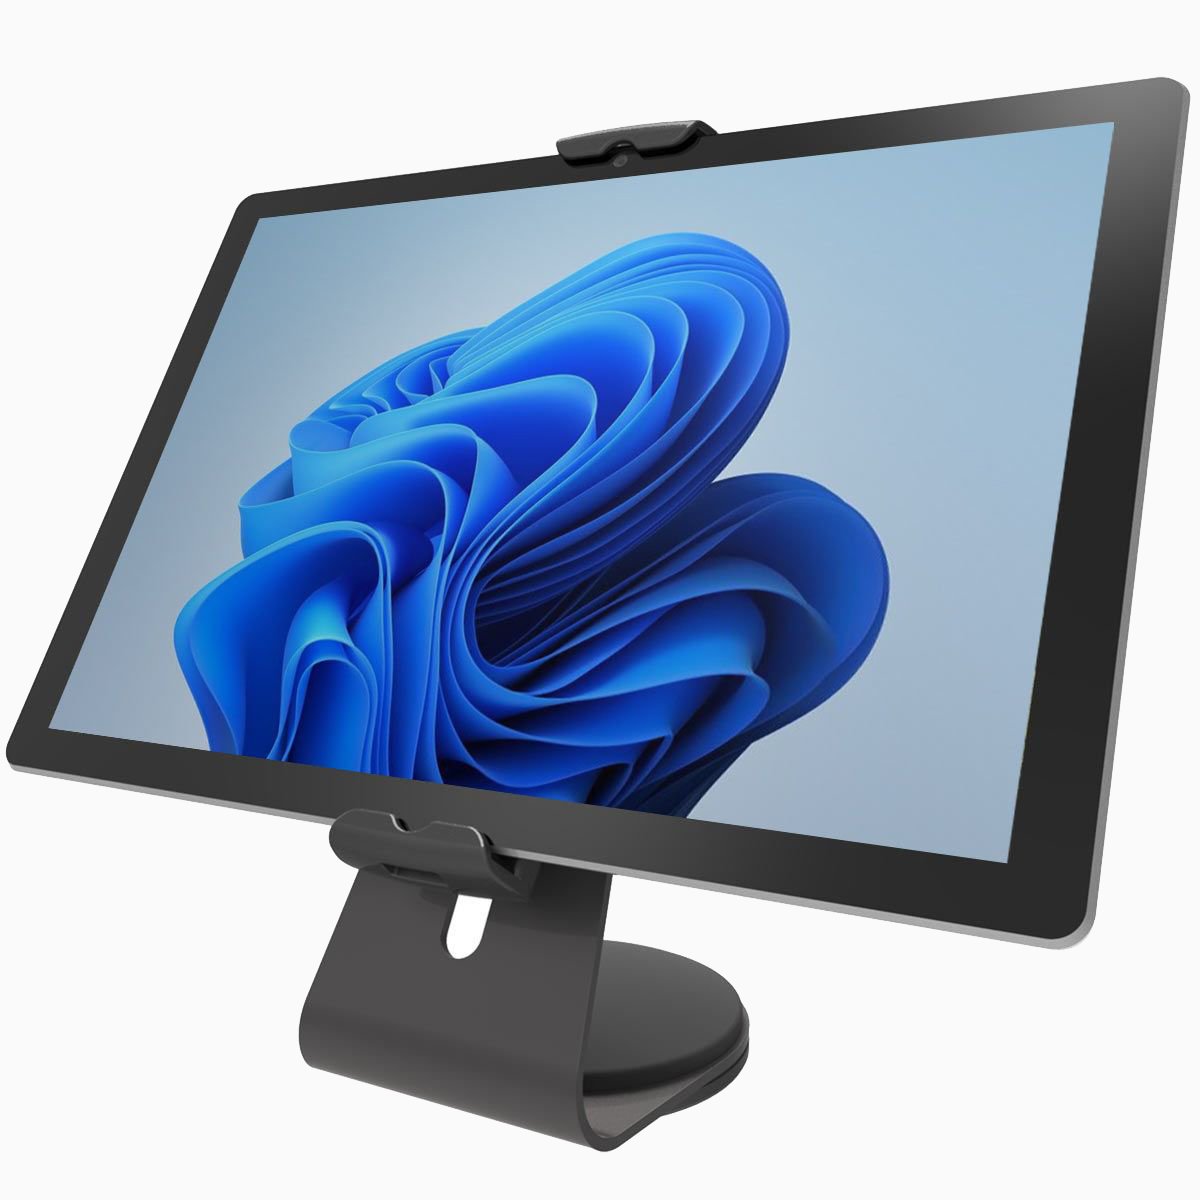 Maclocks Universal Tablet Security Stand – Cling Stand